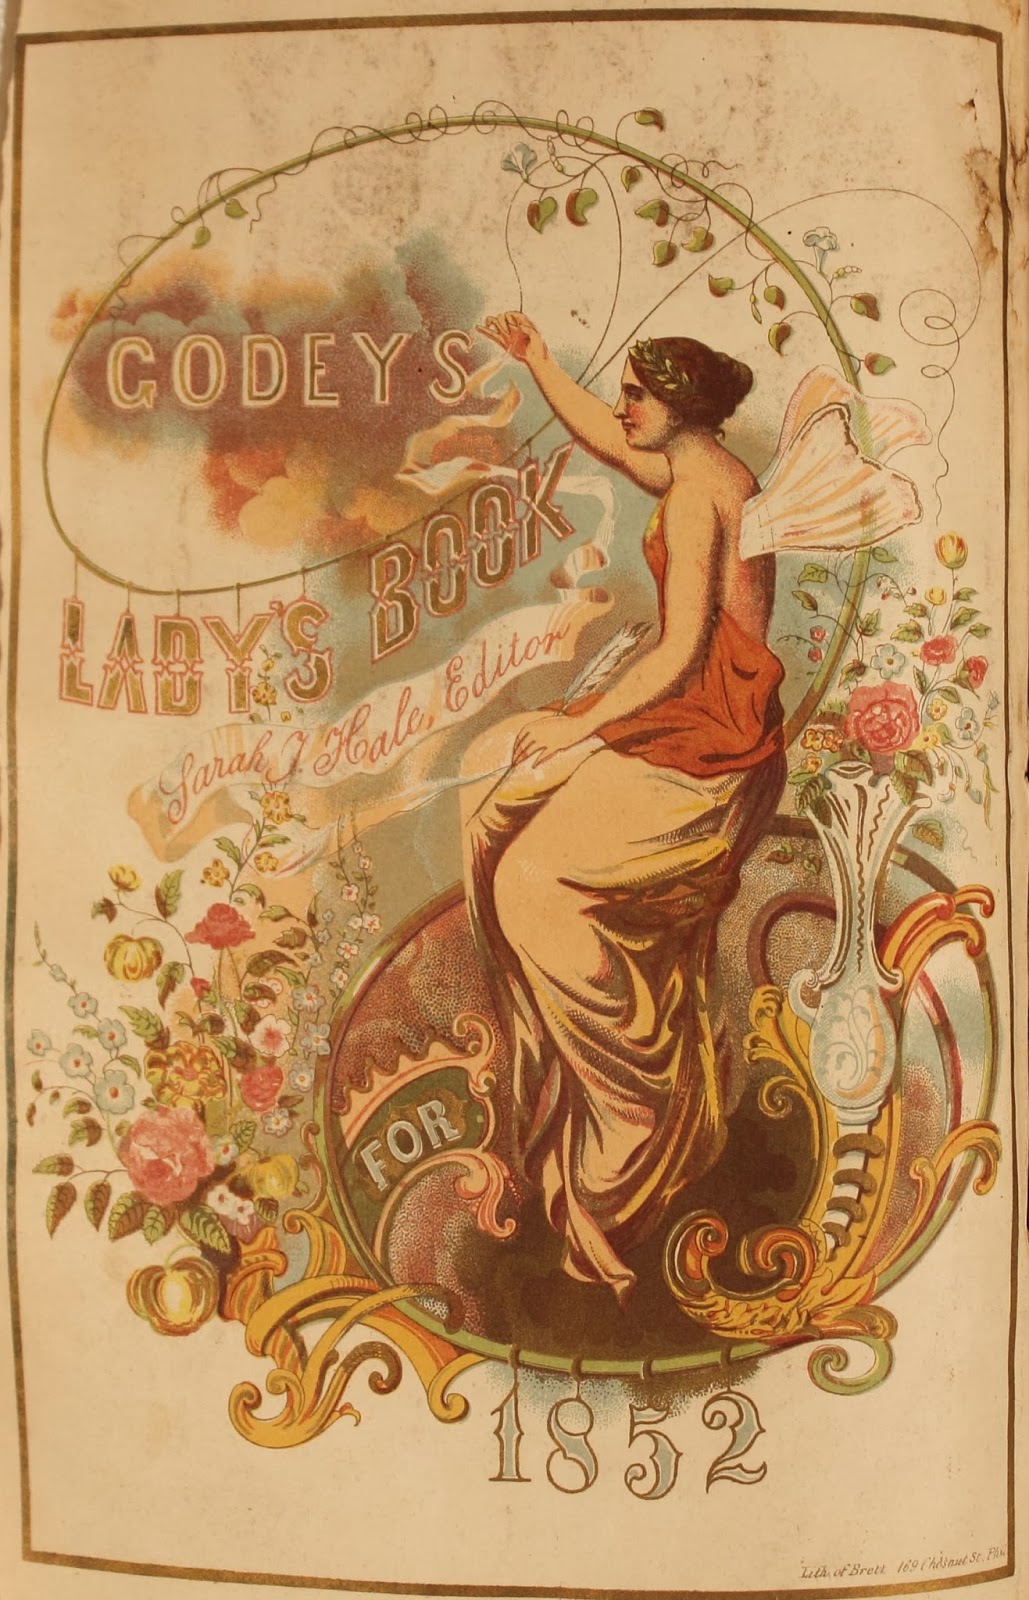 Godey's Lady’s Book, a women's journal edited by women.